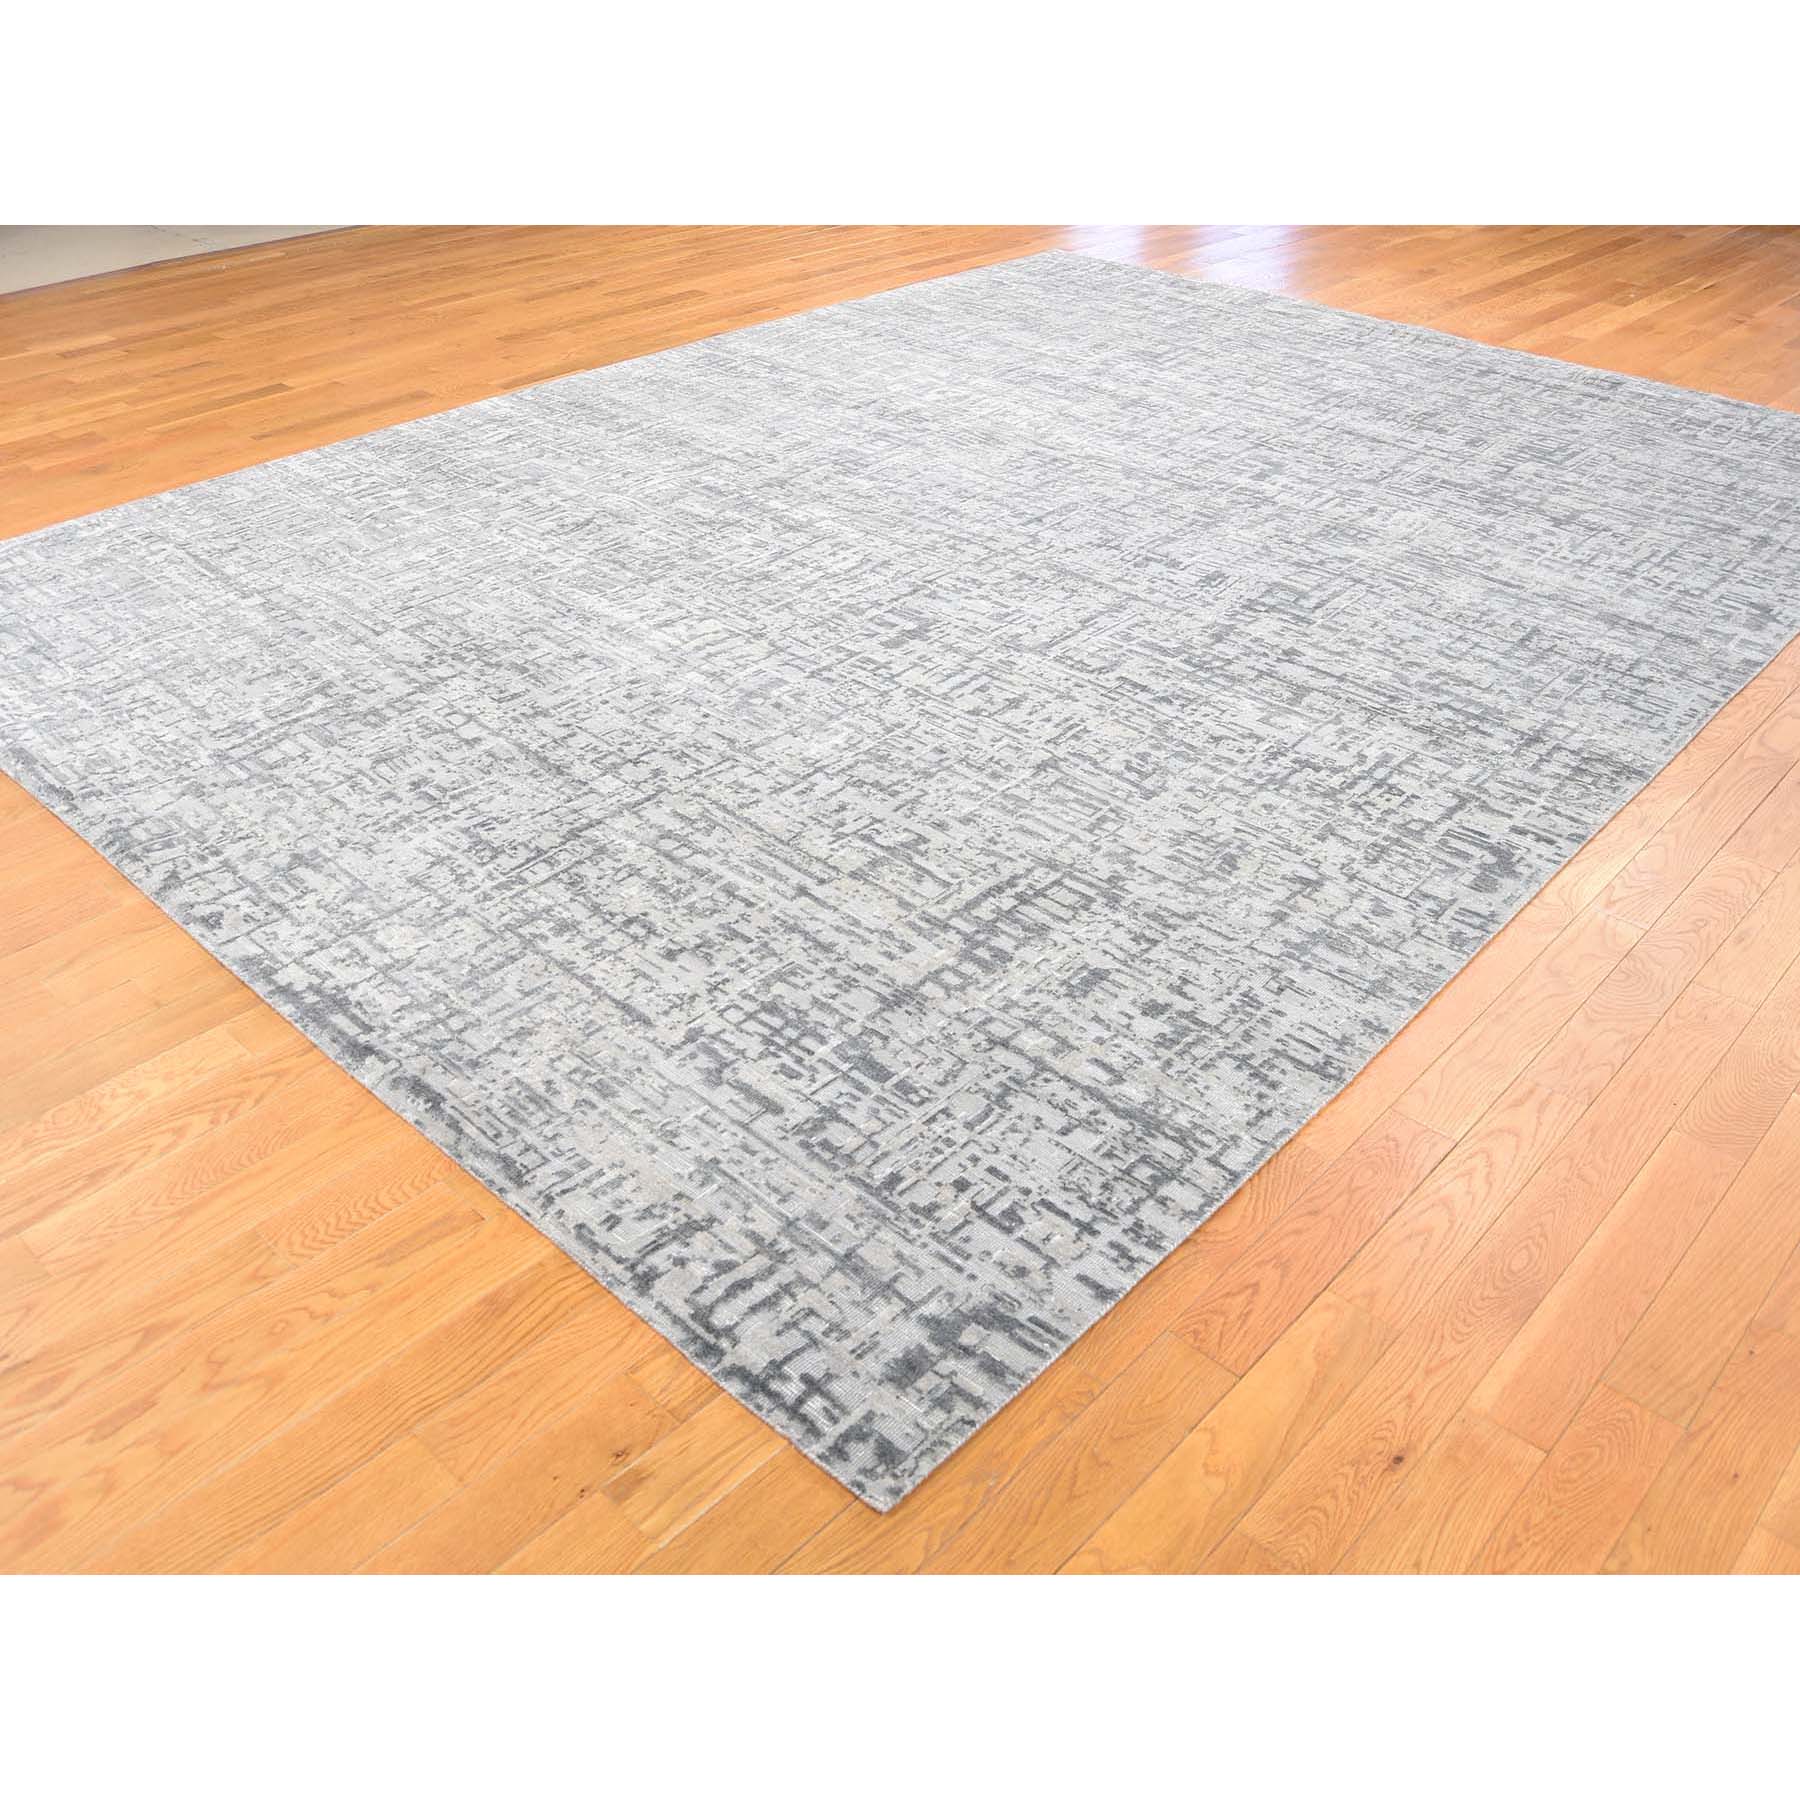 9-2 x12-3  THE MATRIX Pure Silk with Oxidized Wool Tone on Tone Hand-Knotted Rug 